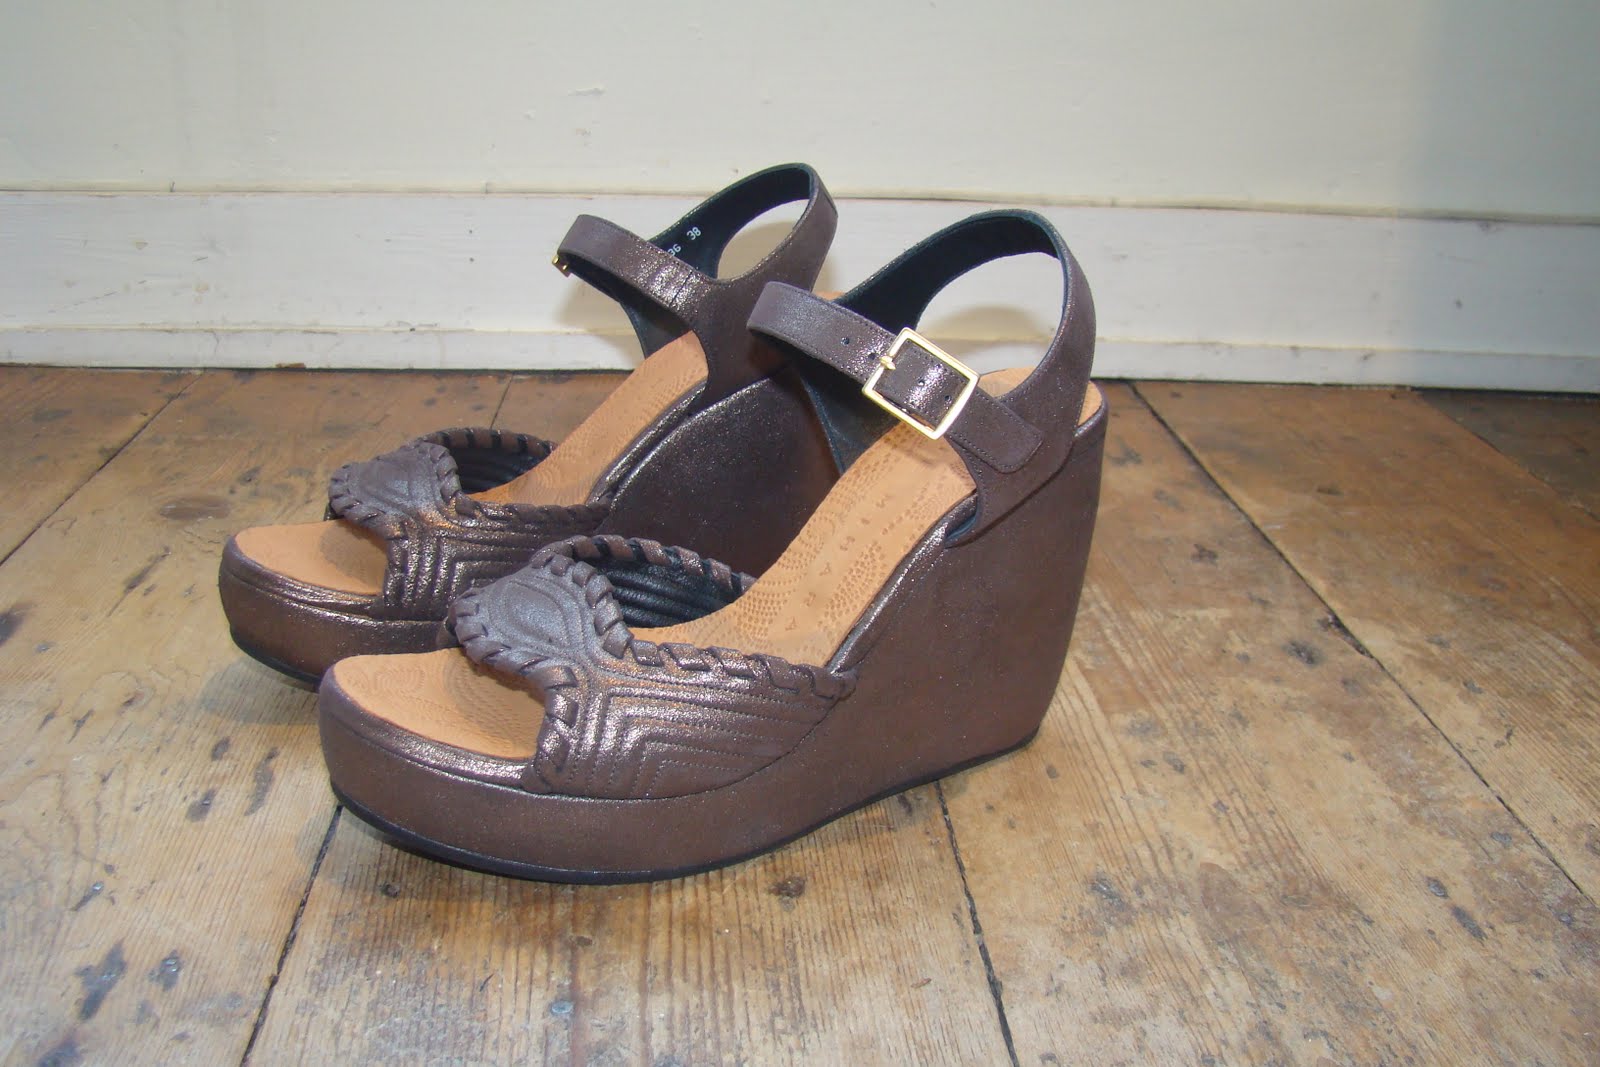 NEILSON BOUTIQUE: CHIE MIHARA WEDGES ARRIVED.